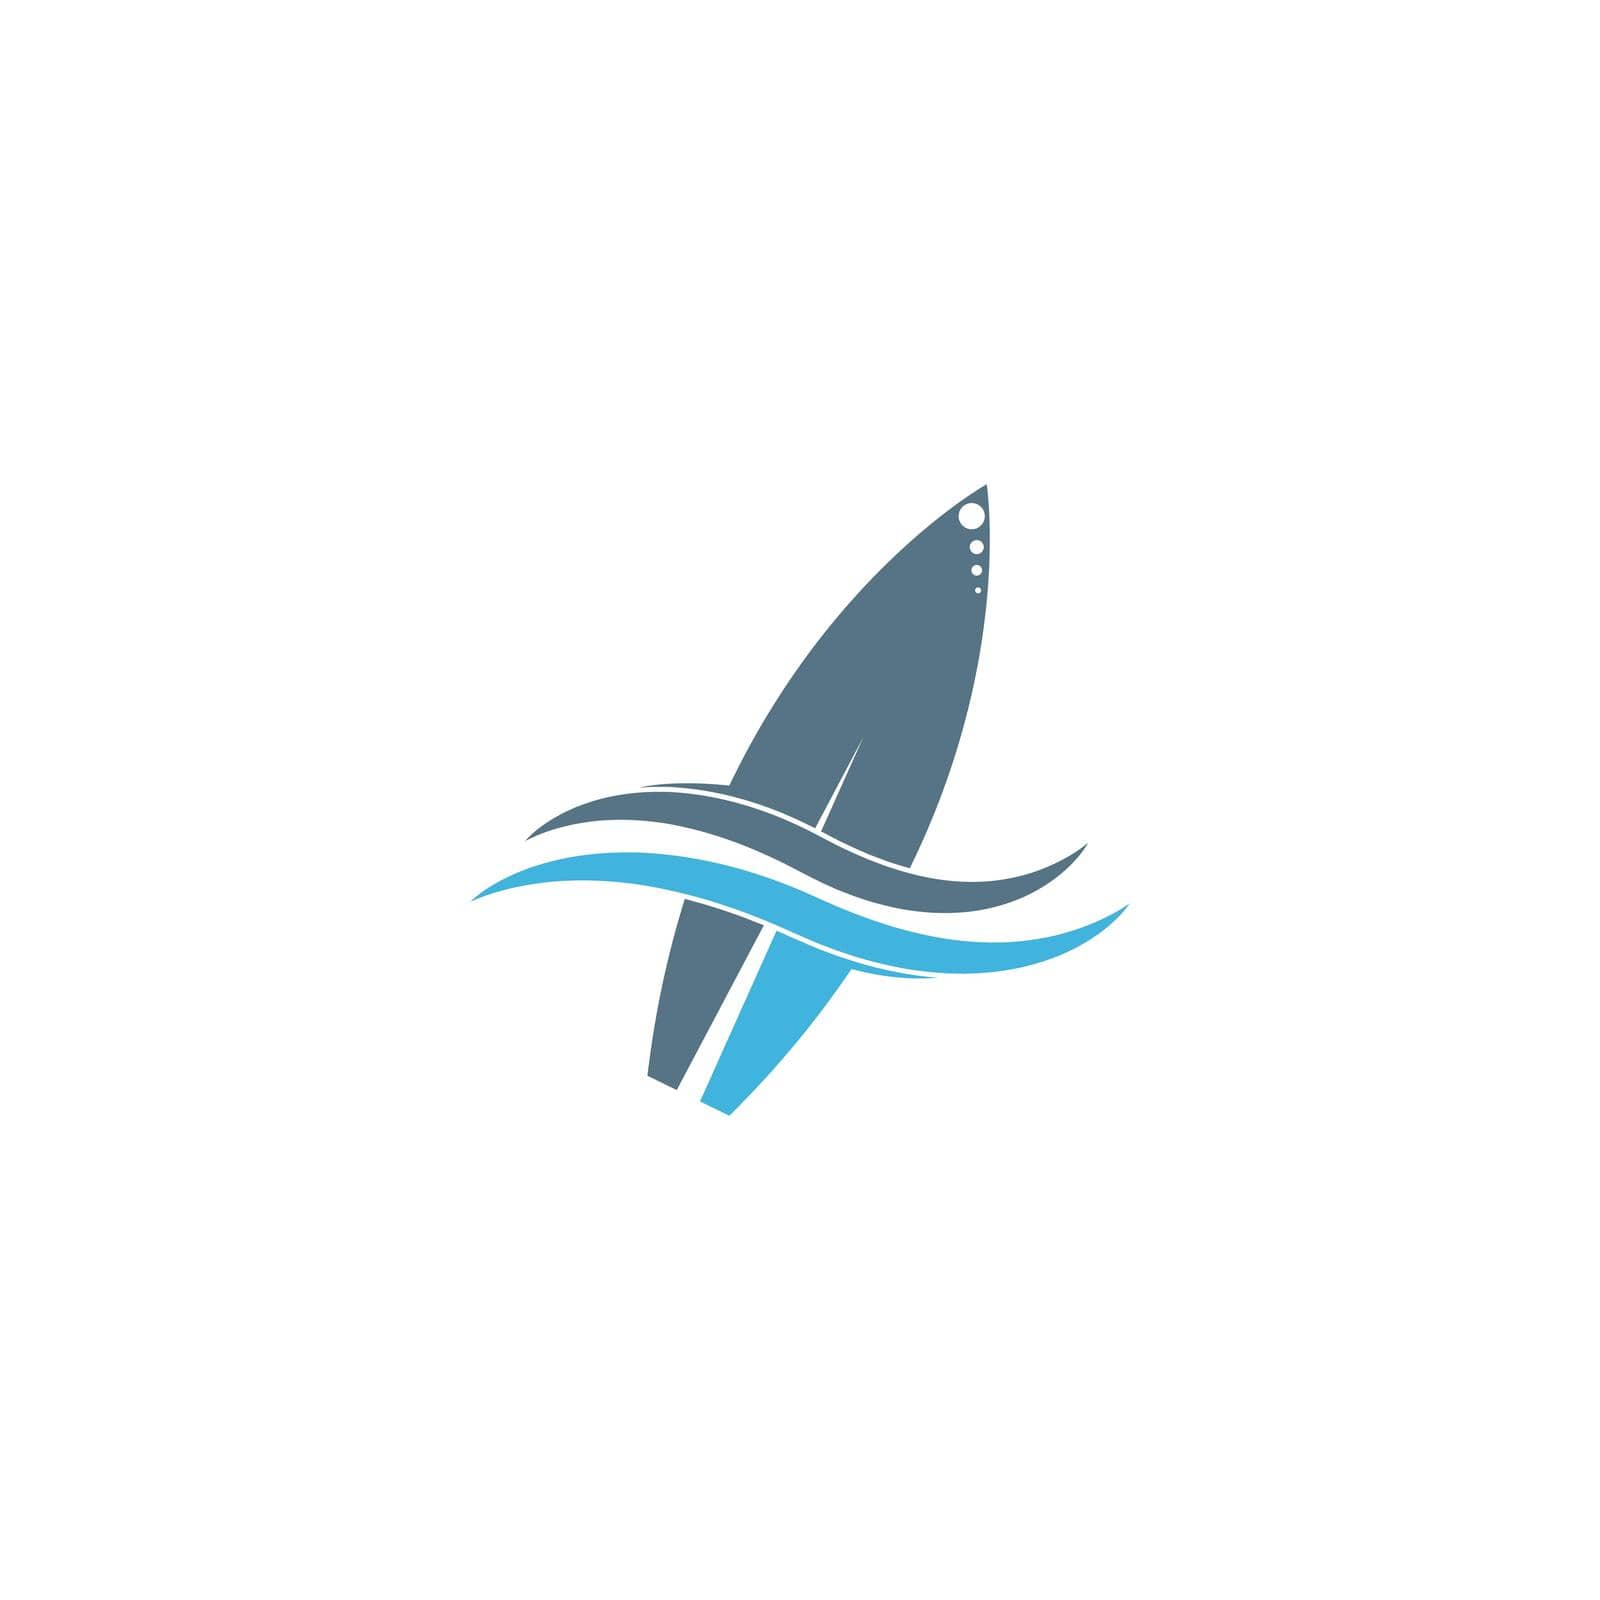 Surfing board icon logo design vector template by bellaxbudhong3